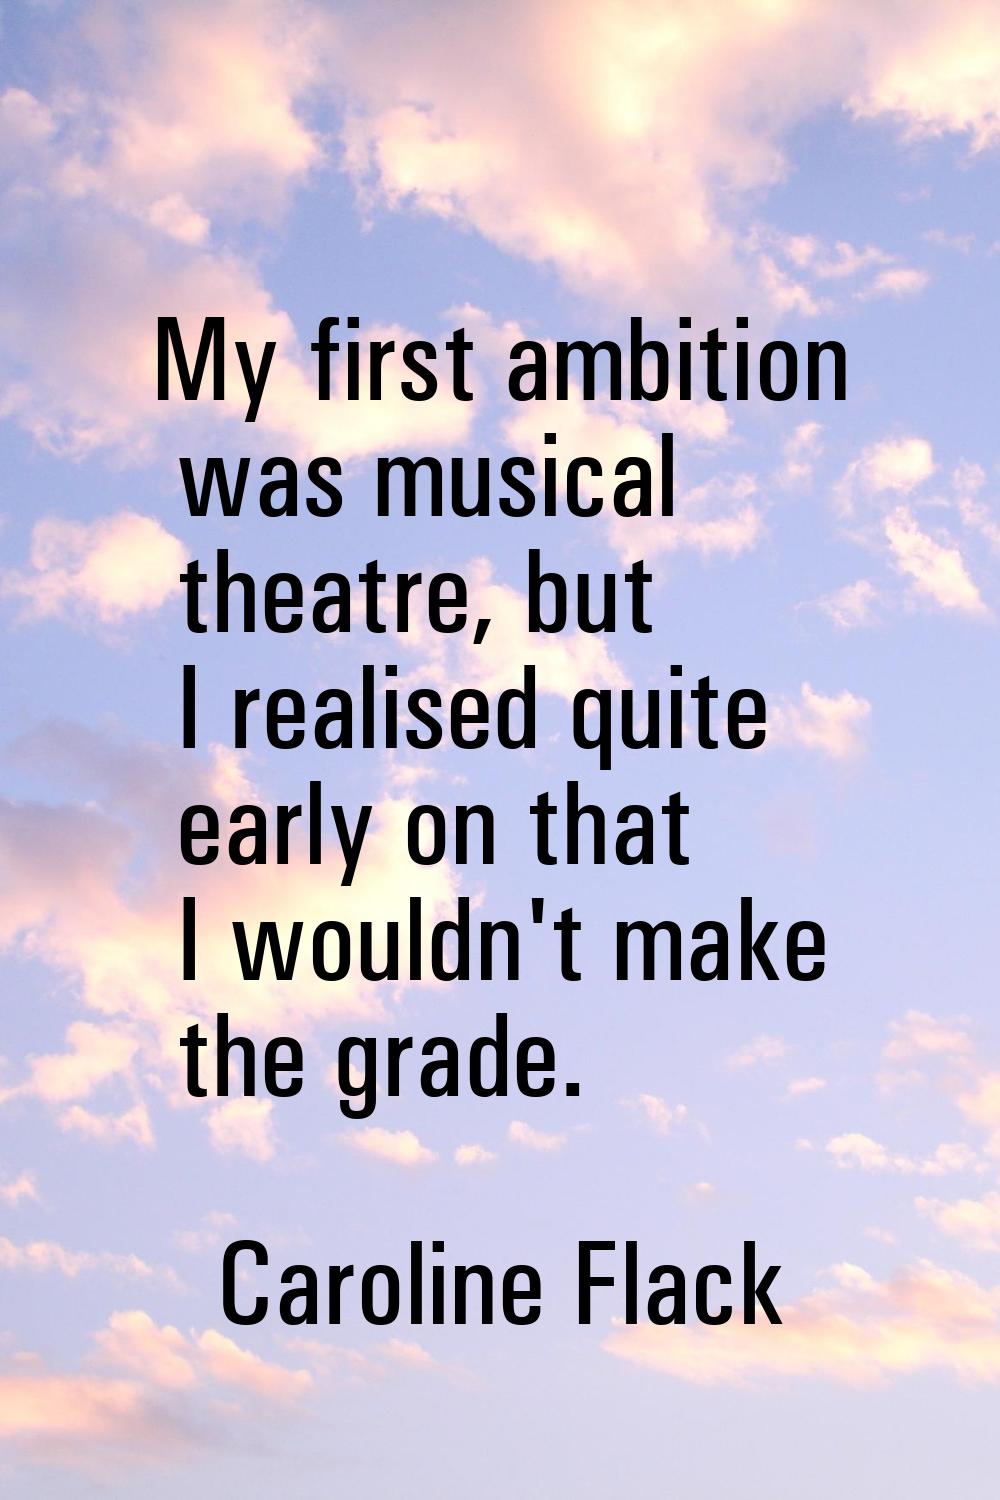 My first ambition was musical theatre, but I realised quite early on that I wouldn't make the grade